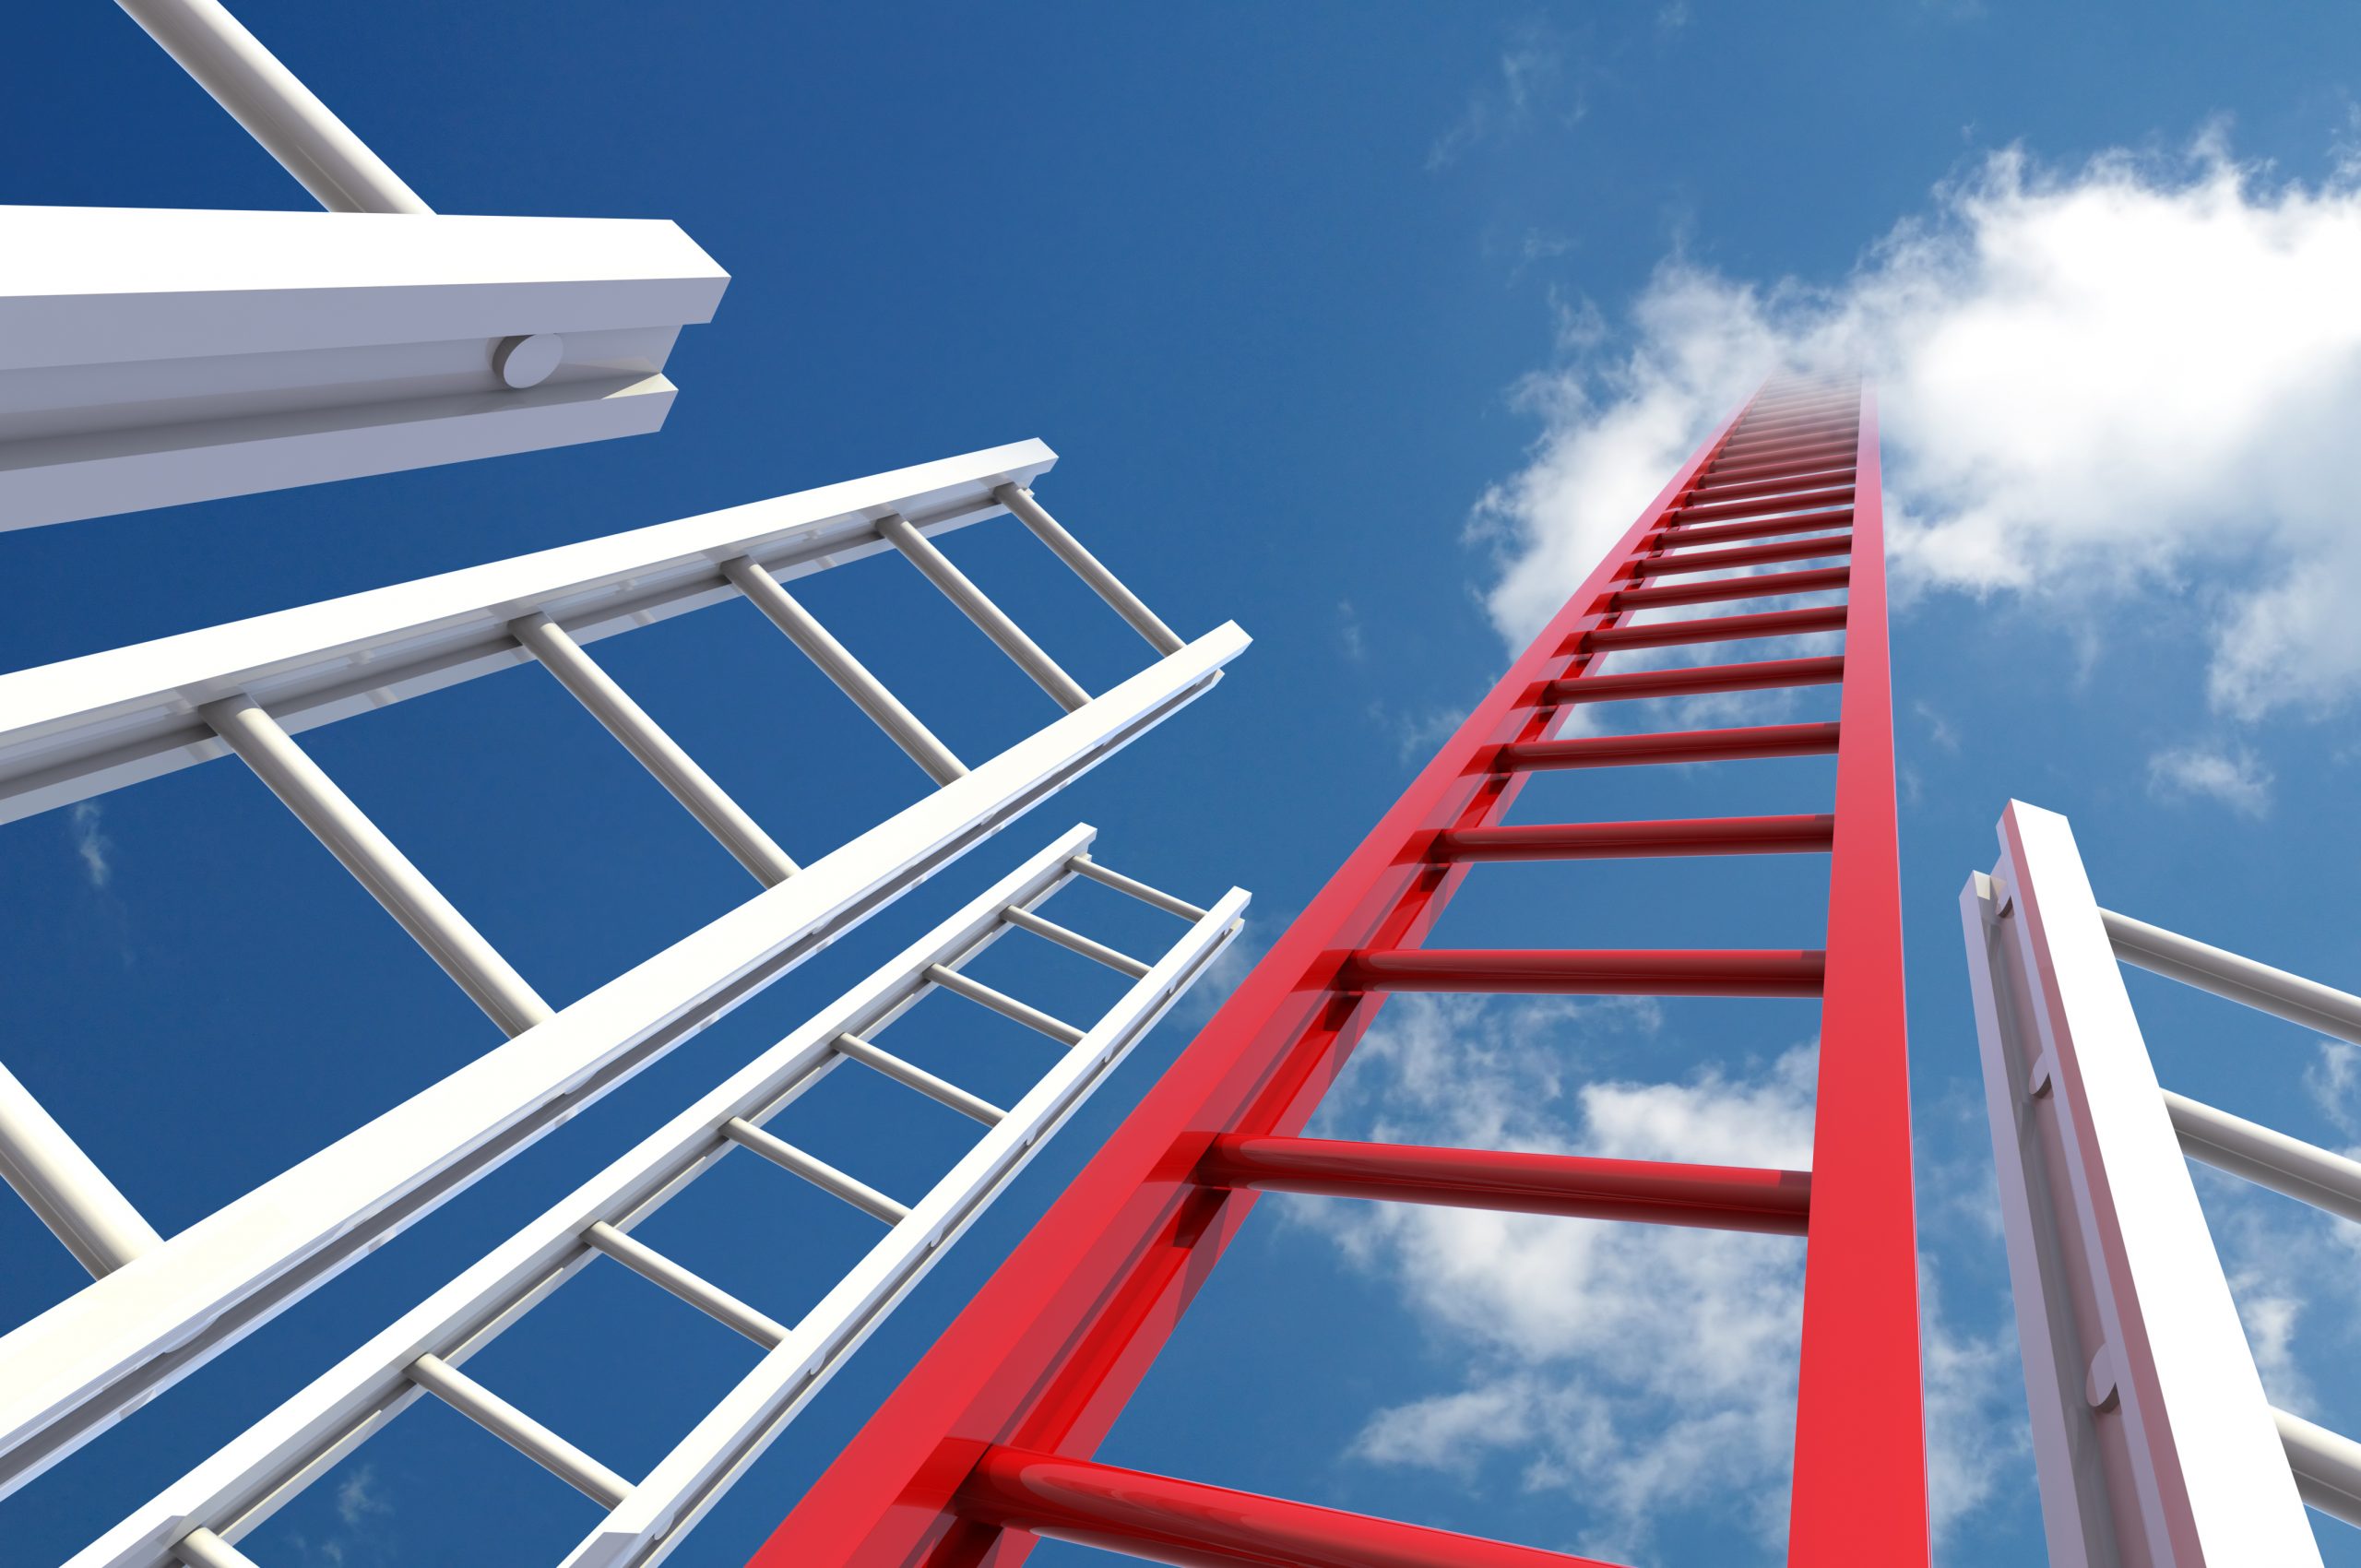 Red Ladder of Success among White Ladders